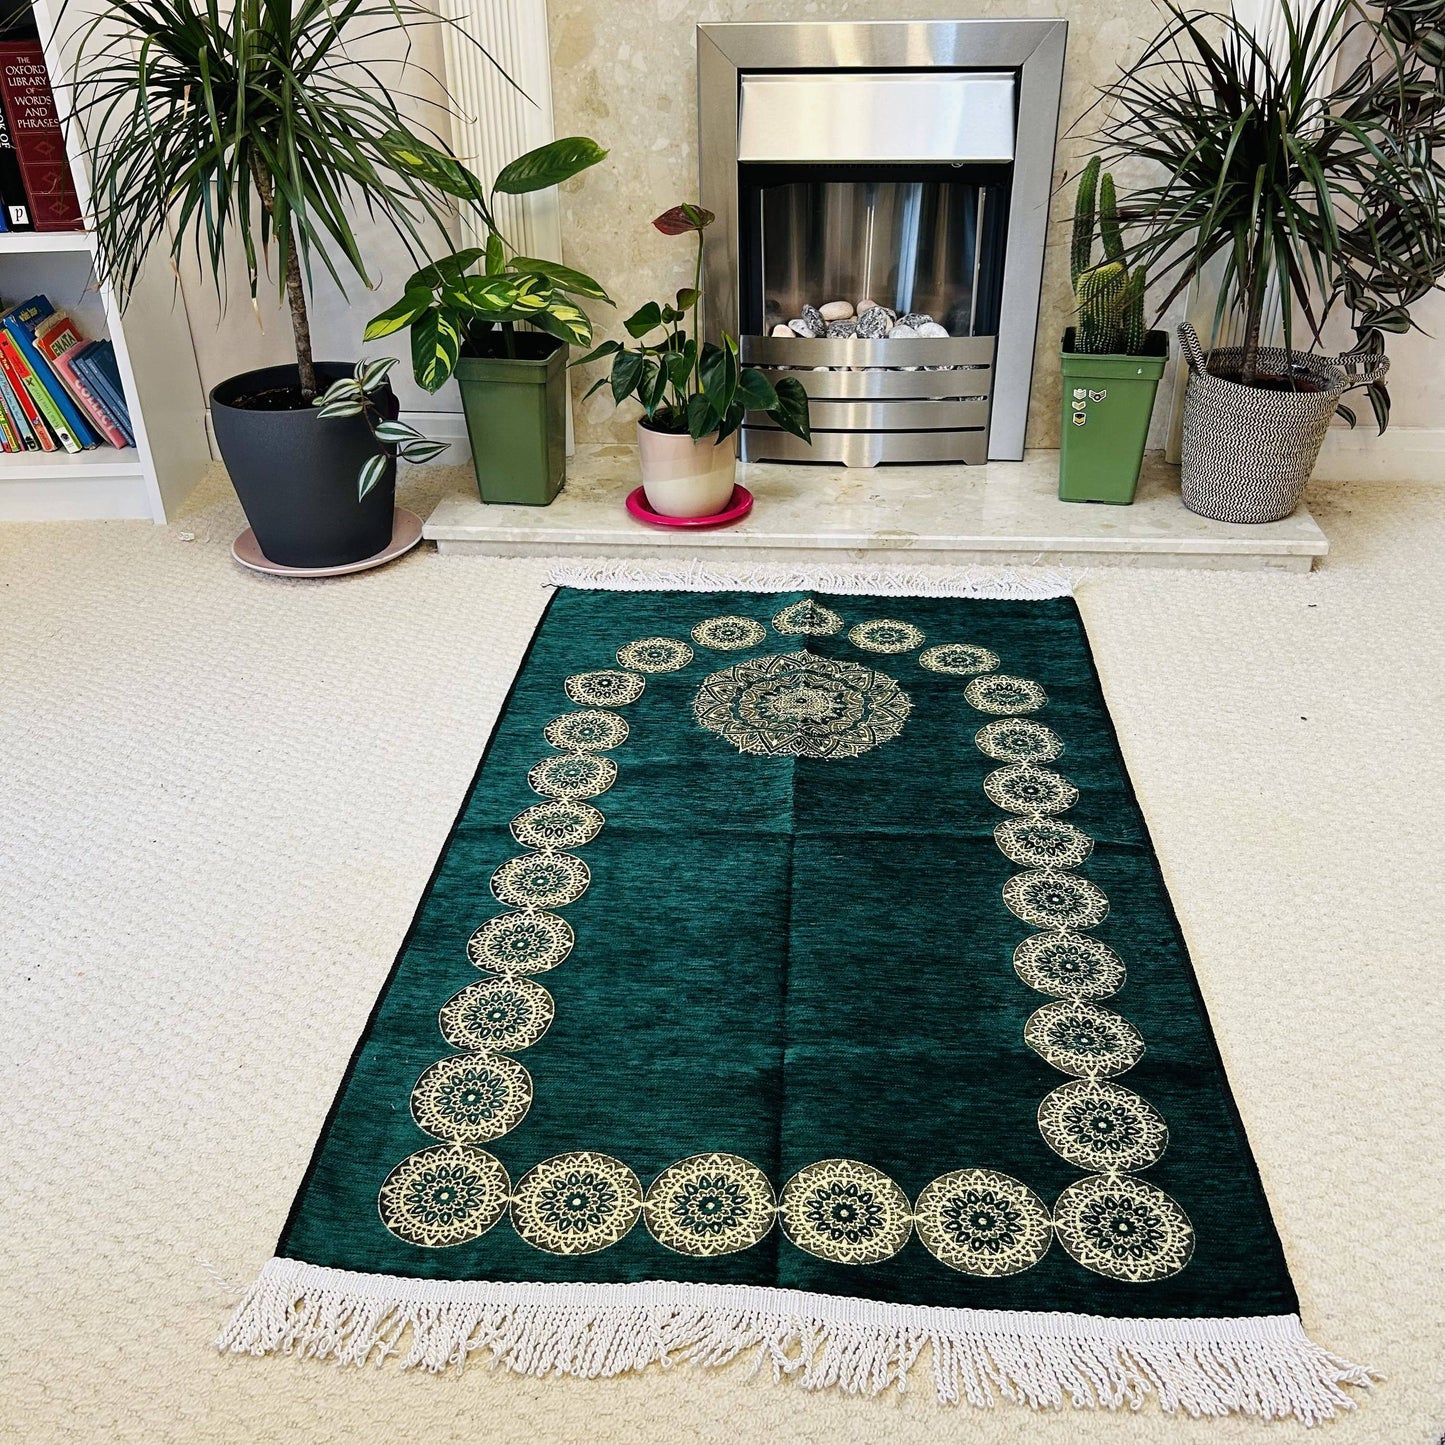 Mihrab Style Embroidered Ottoman Prayer Mat